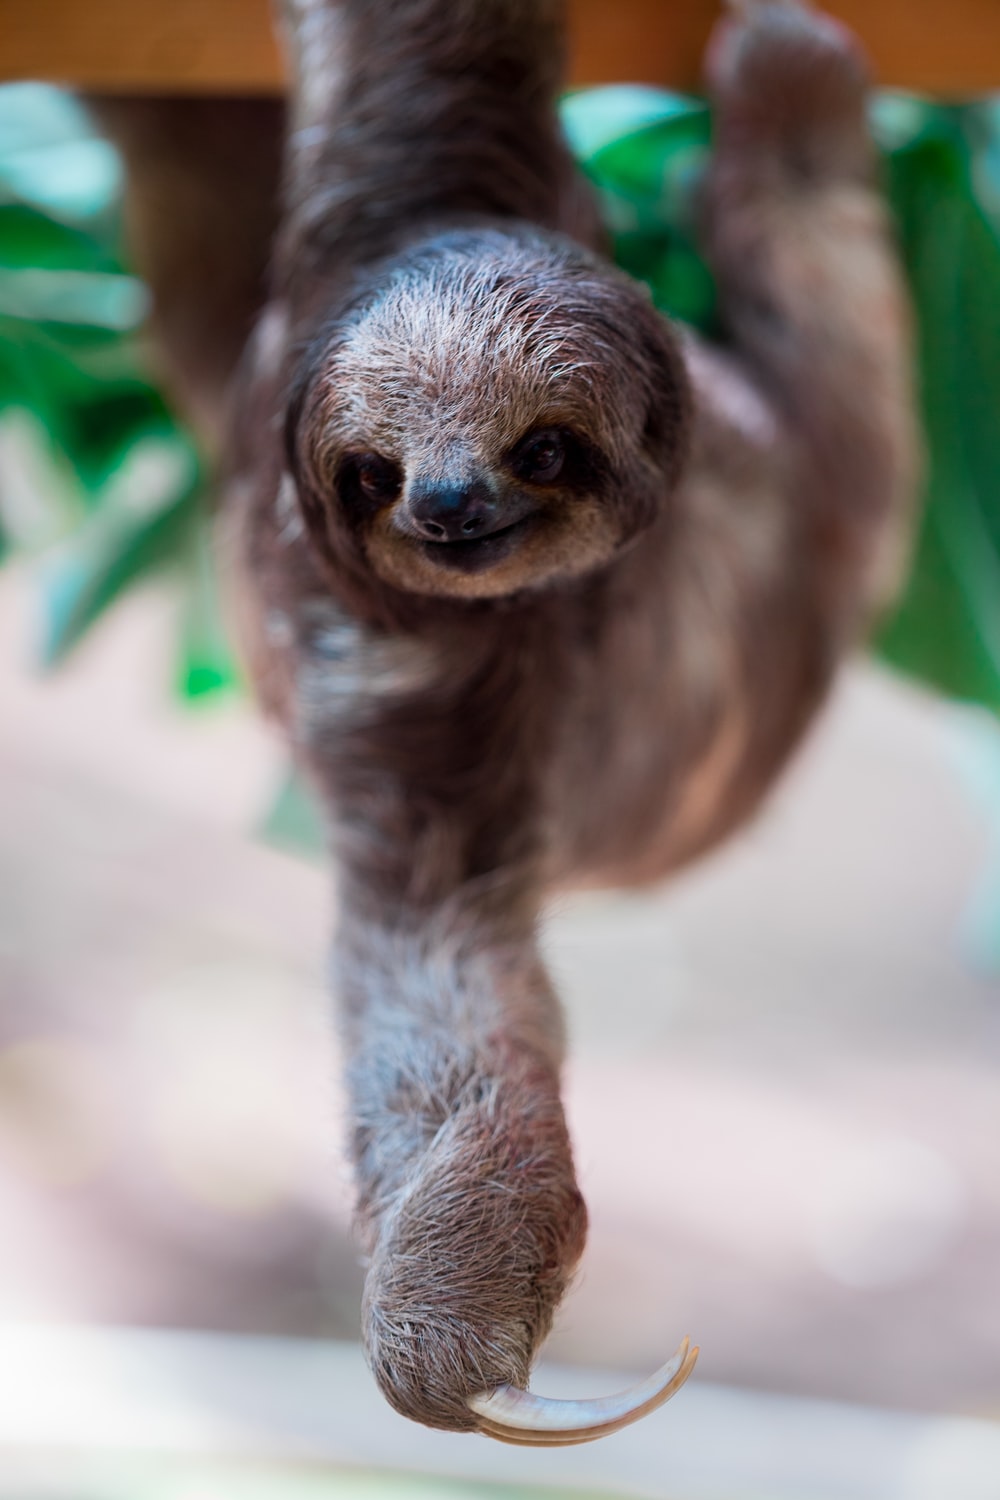 Sloth Picture. Download Free Image